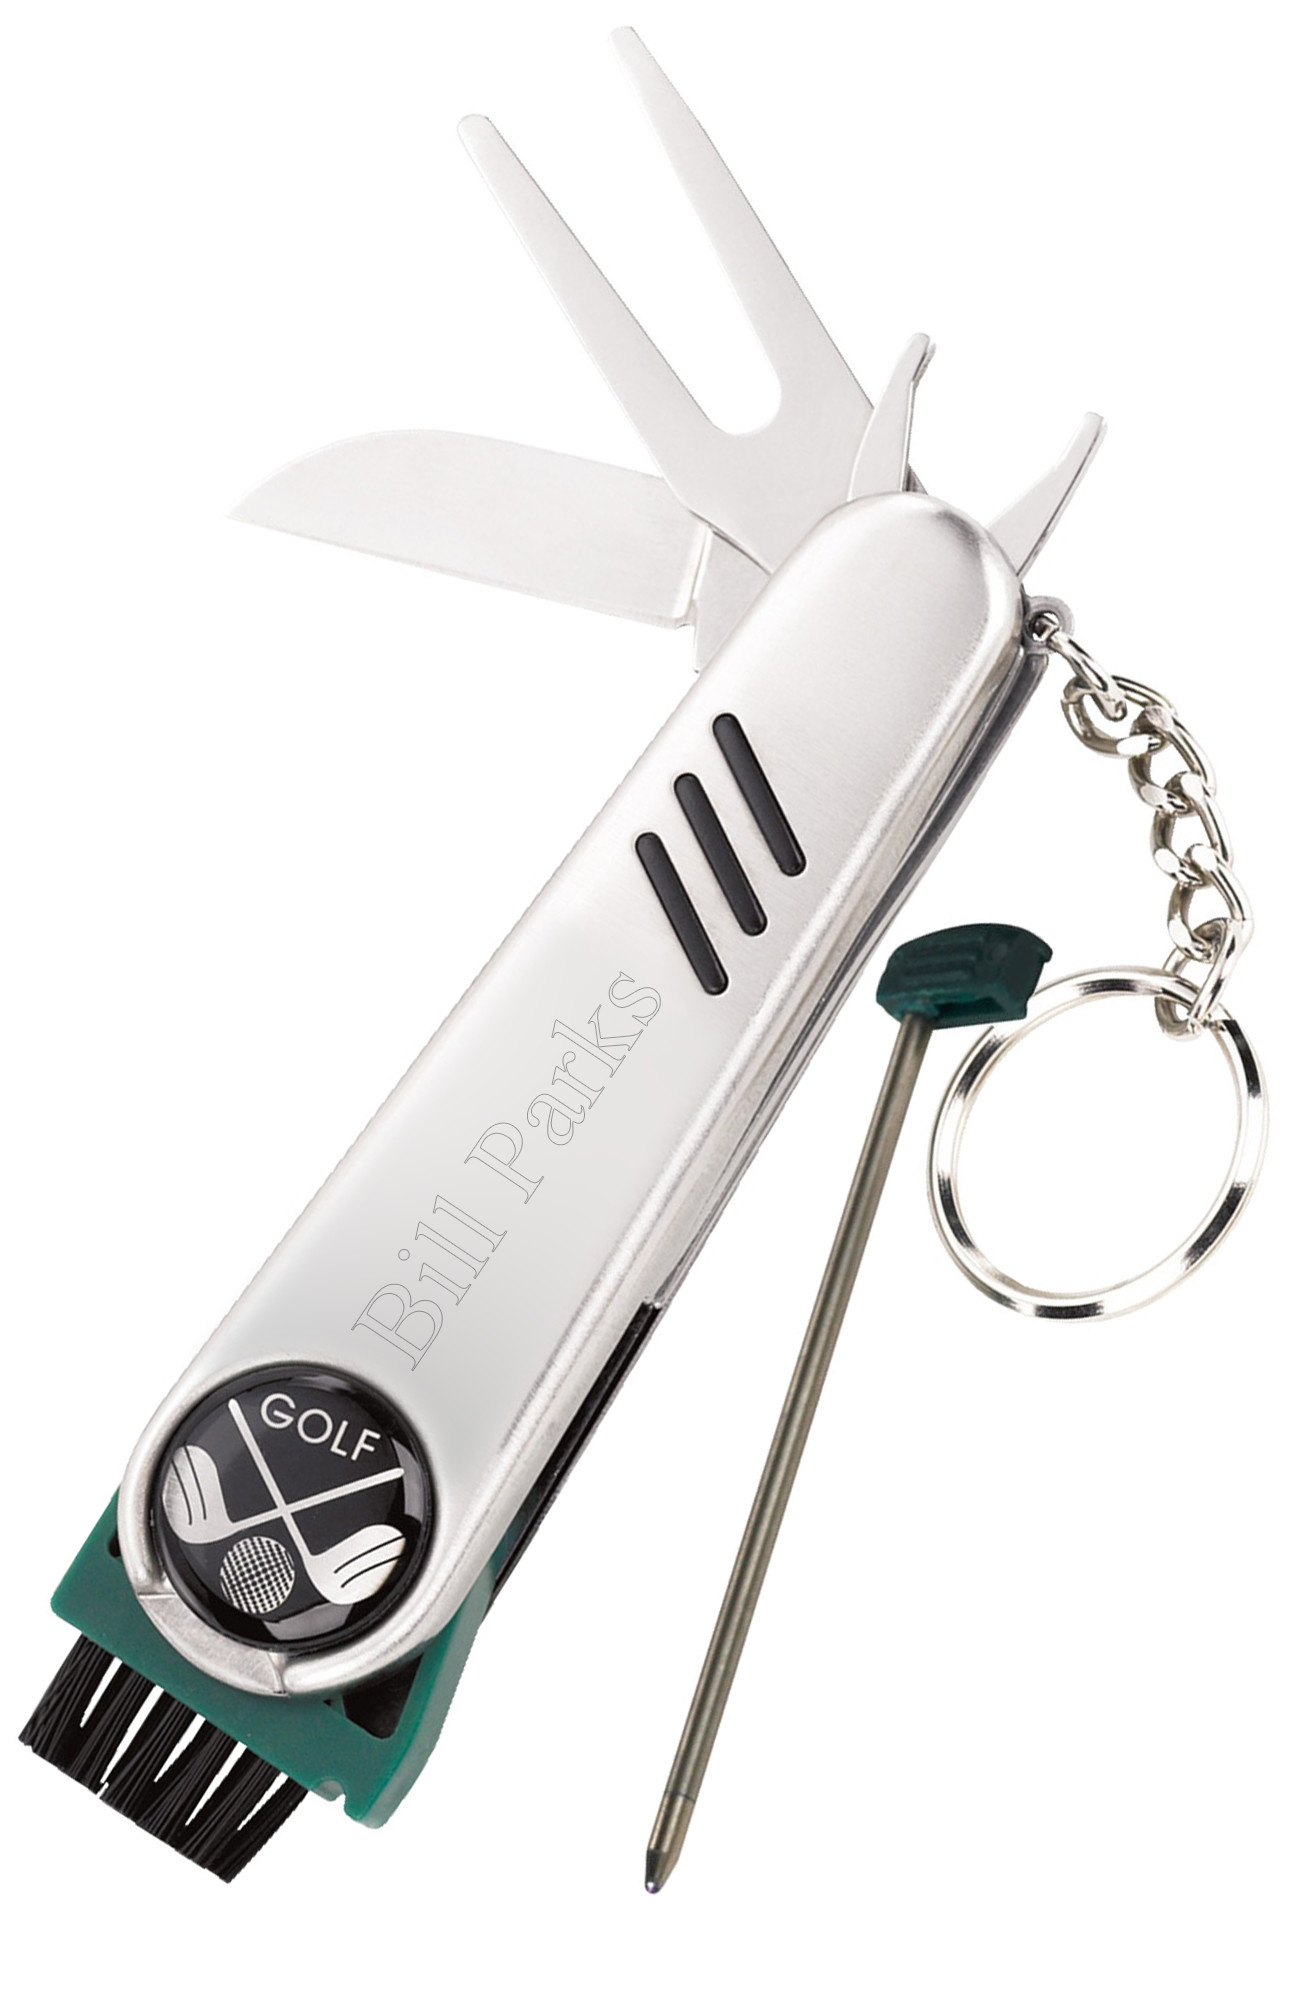 7 Function Stainless Steel Golf Tool Keychain